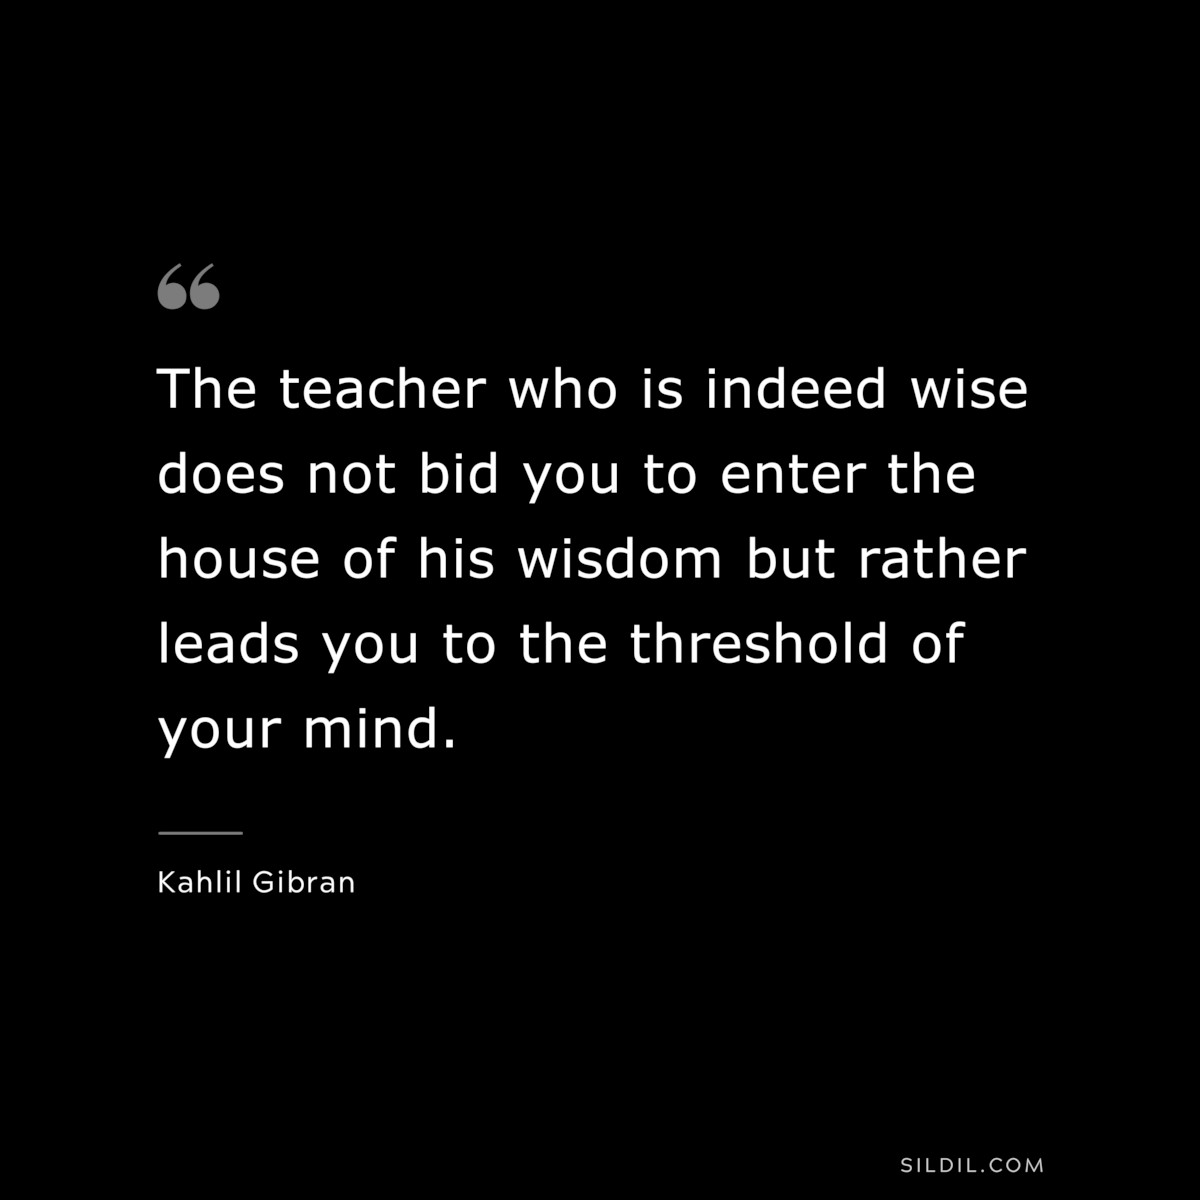 The teacher who is indeed wise does not bid you to enter the house of his wisdom but rather leads you to the threshold of your mind. ― Kahlil Gibran